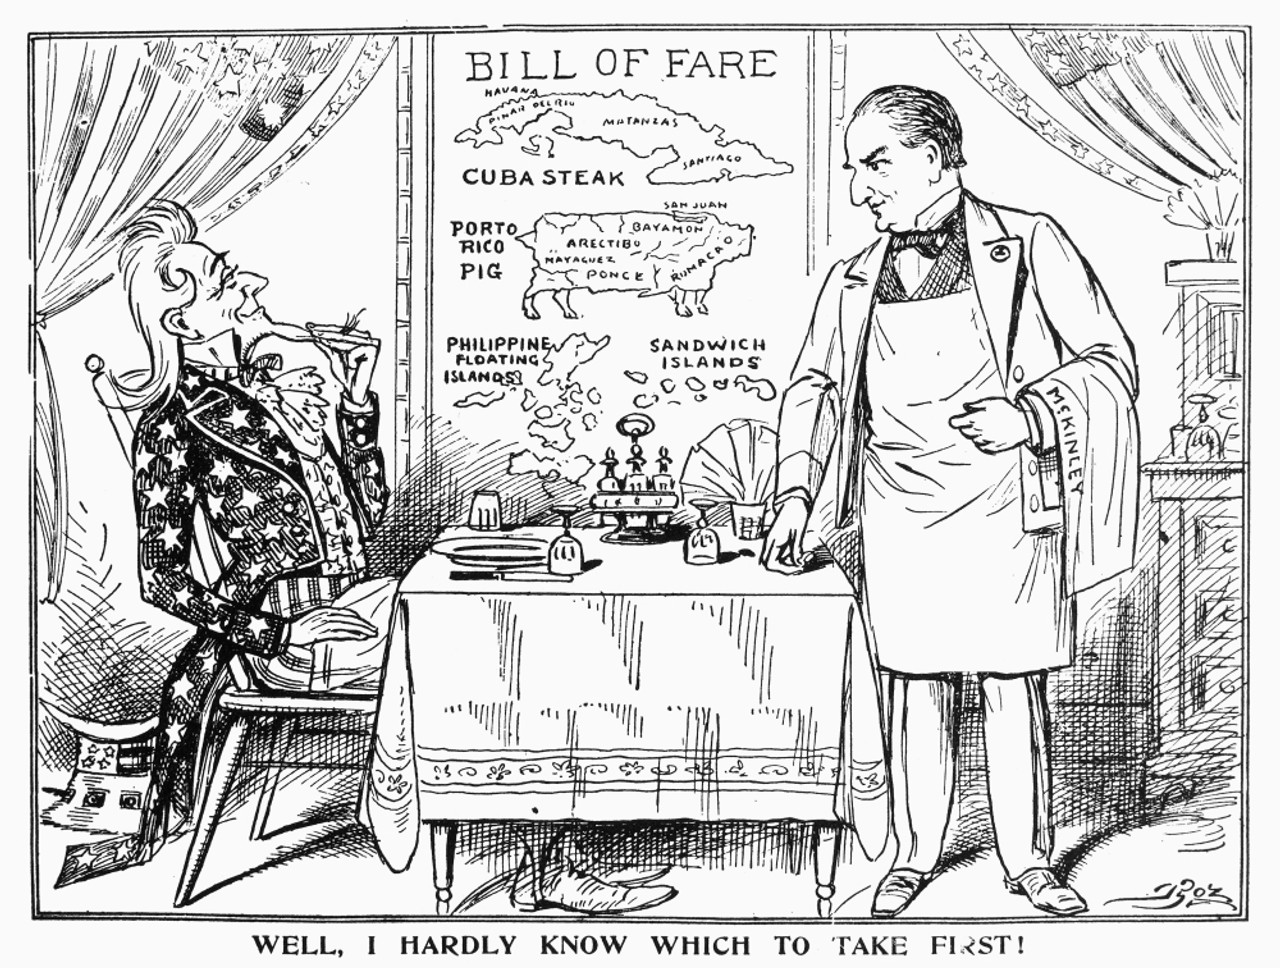 Imperialism Cartoon, C1900. /N'Well, I Hardly Know Which To Take First!' American  Cartoon Comment, C1900,